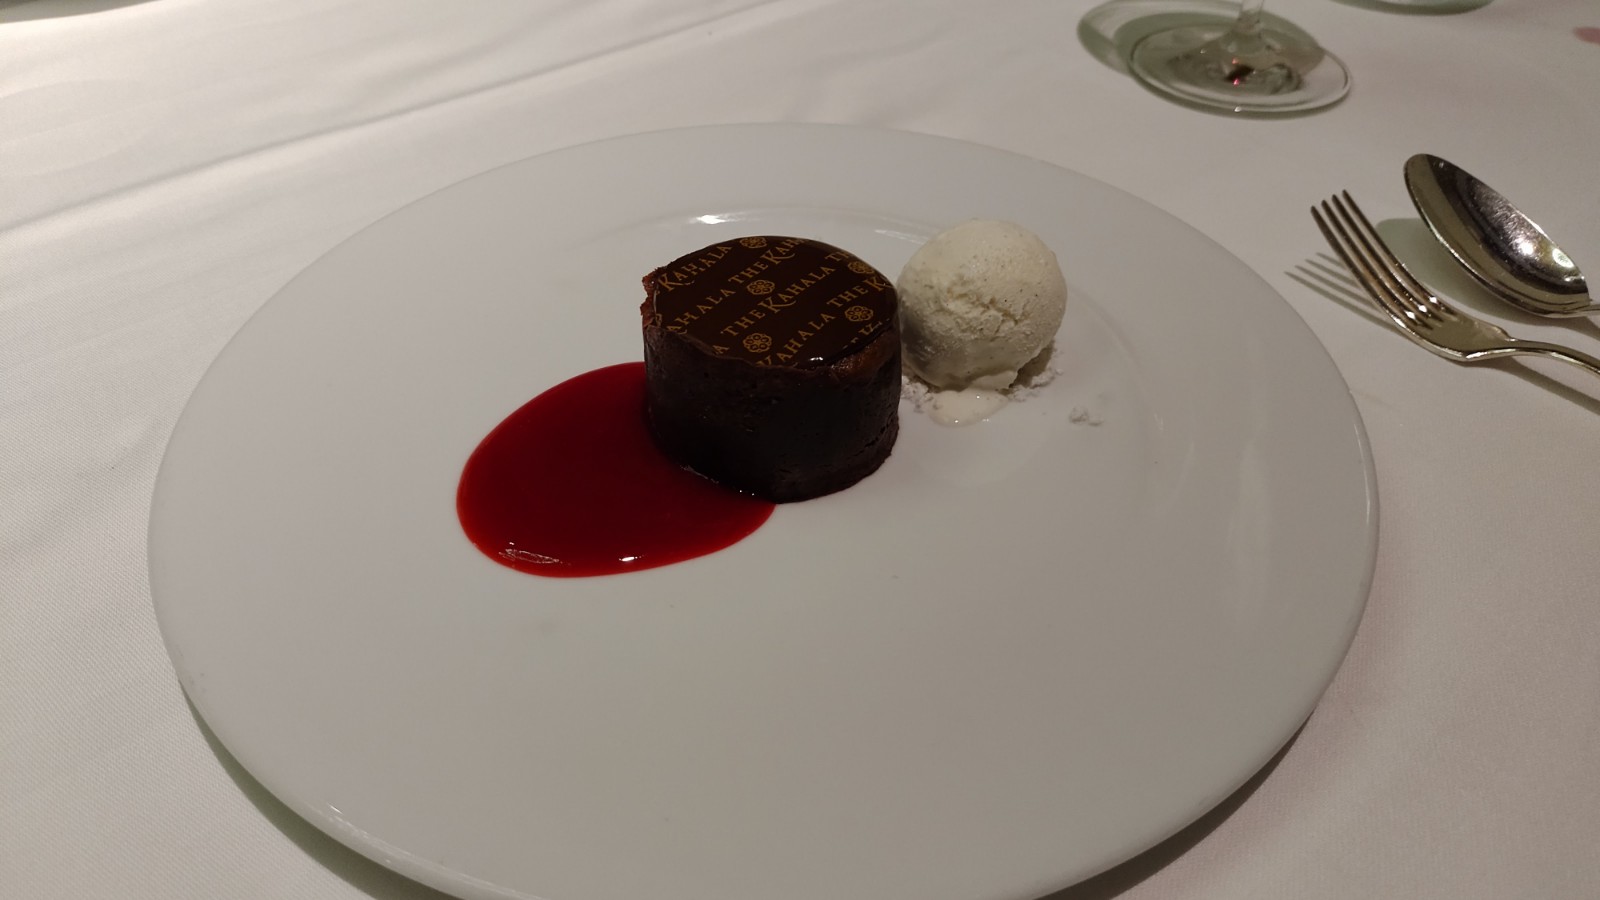 PICTURE OF ANOTHER DESERT CALLED HOKU’S WARM CHOCOLATE COULANT
Raspberry Coulis, Vanilla Ice Cream and Alaea Salt